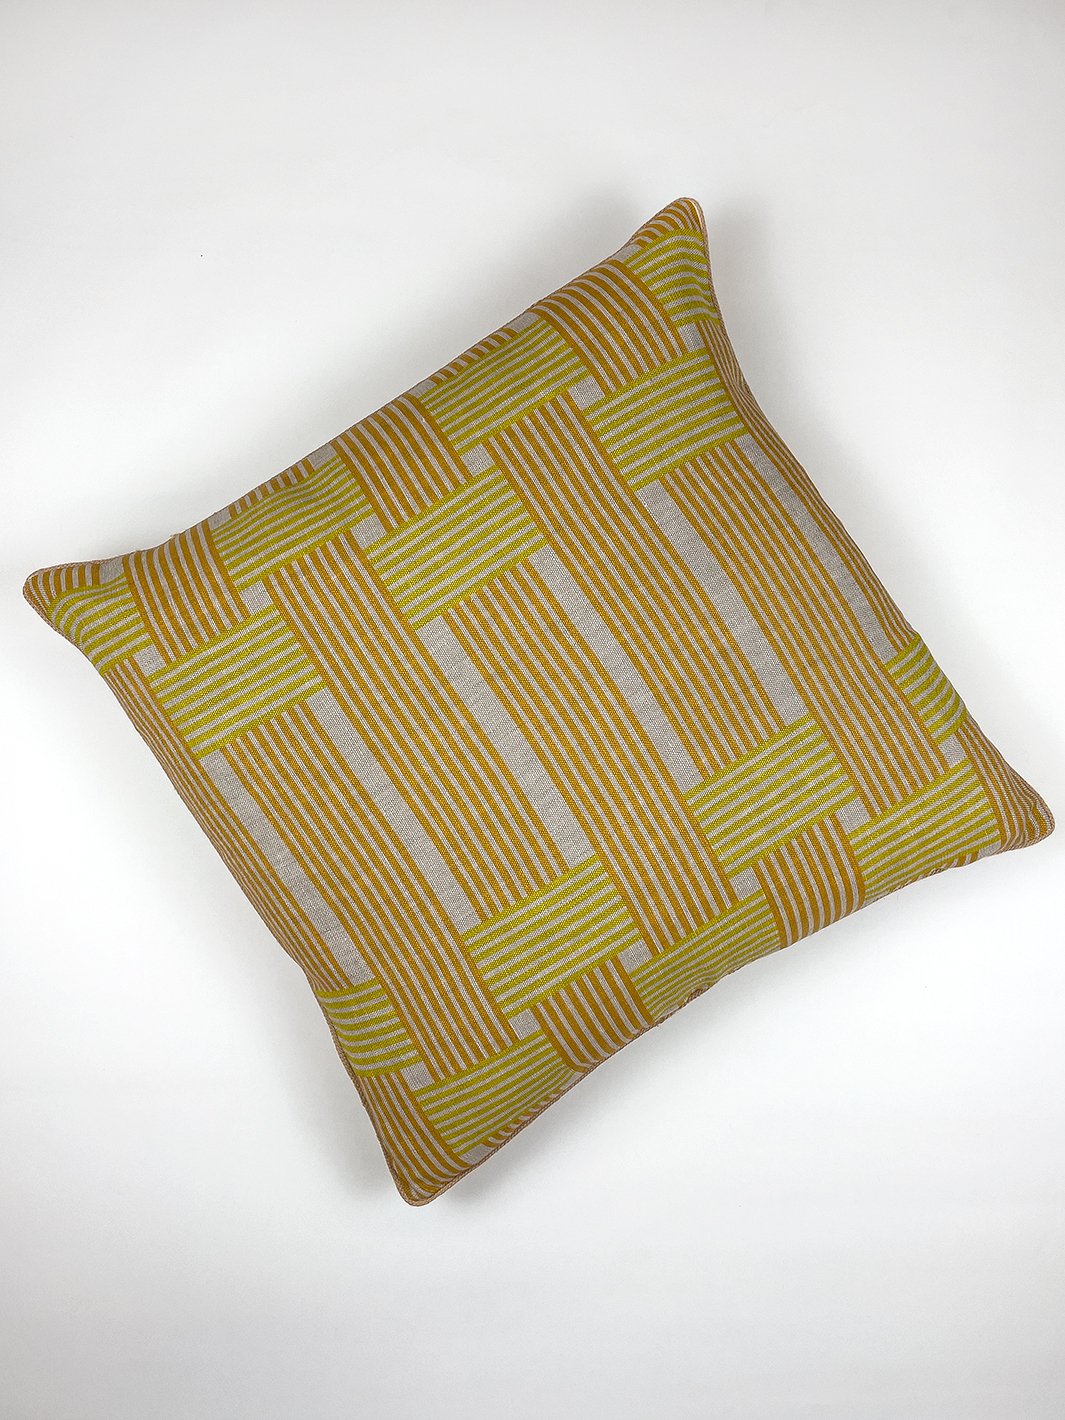 'Roman Holiday Woven' Throw Pillow by Barbie™ - Marigold